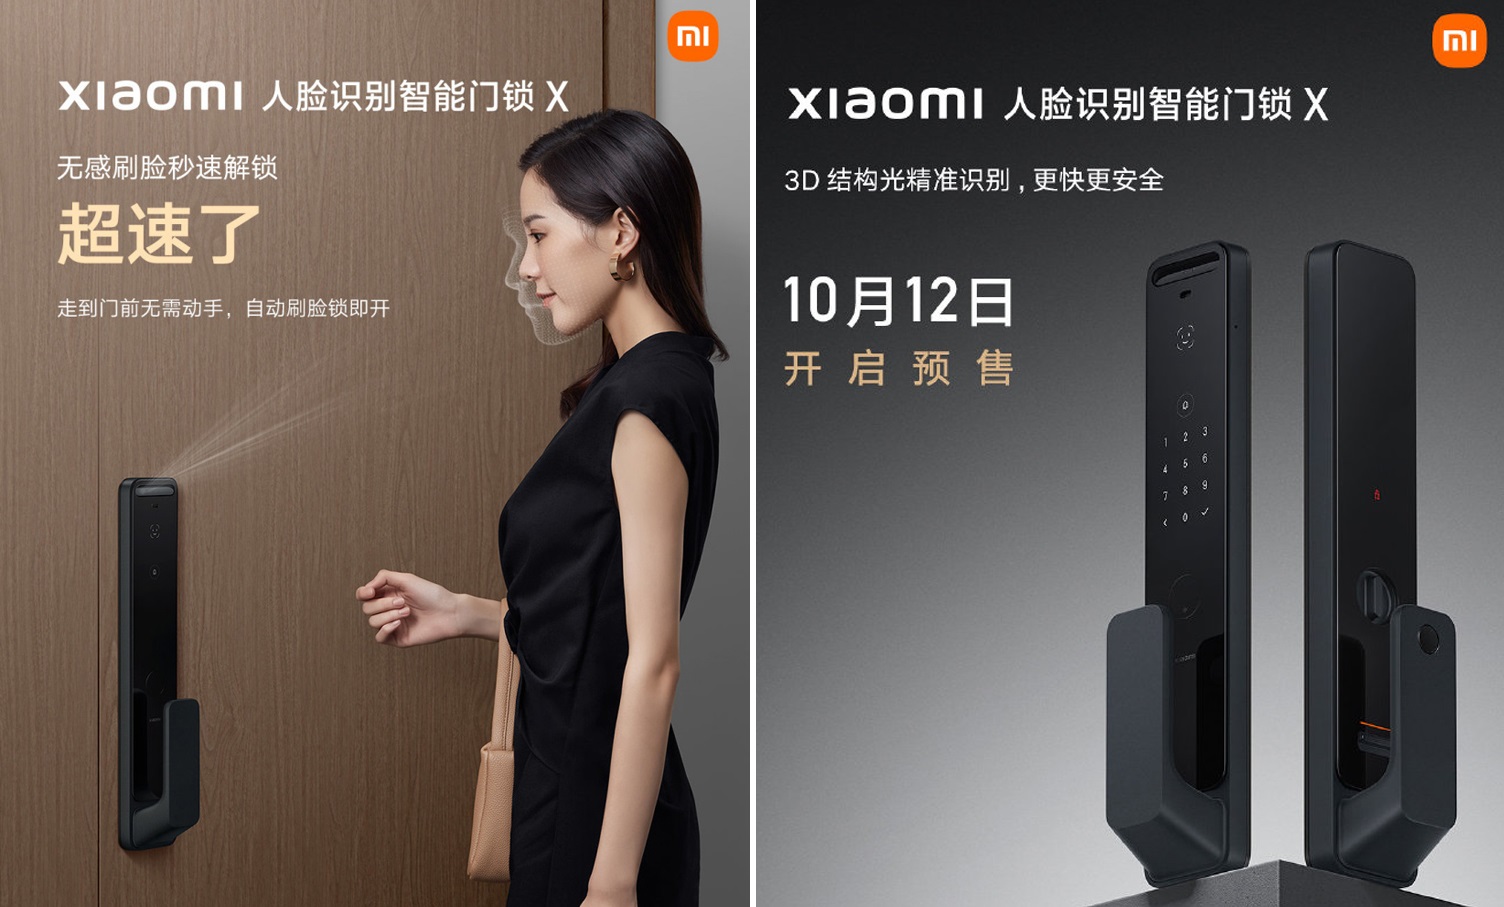 Xiaomi unveiled a door lock with NFC, AMOLED screen and 3D face recognition system